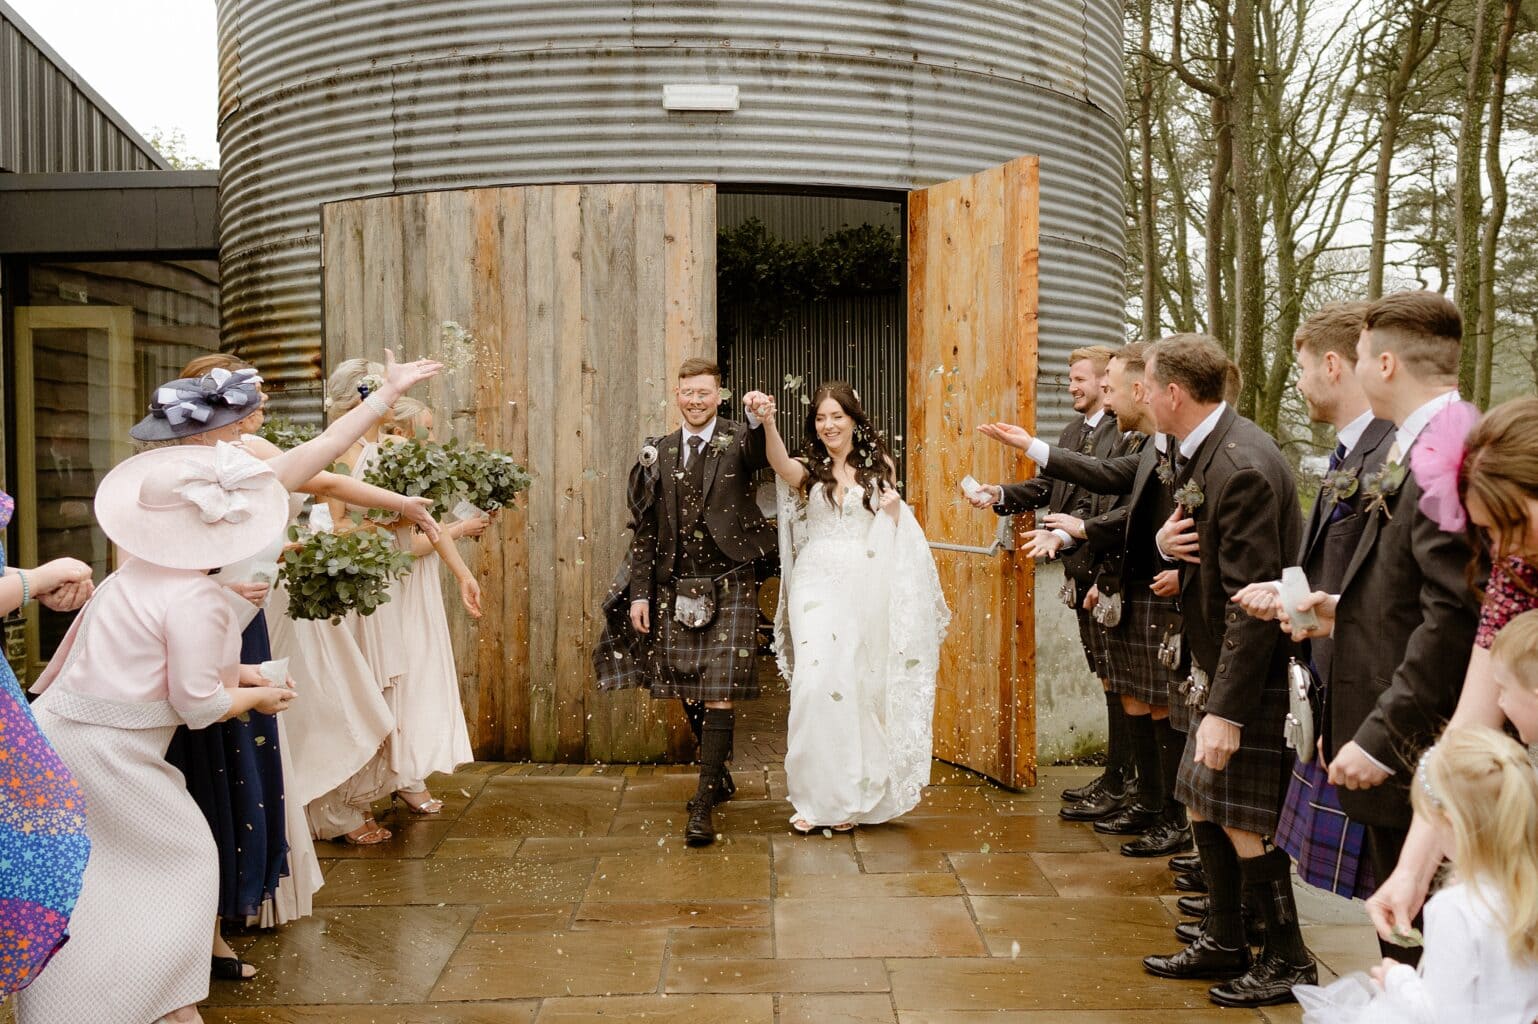 guests toss confetti as the newly married bride and groom exit the barn wedding venues west lothian smiling and holding hands